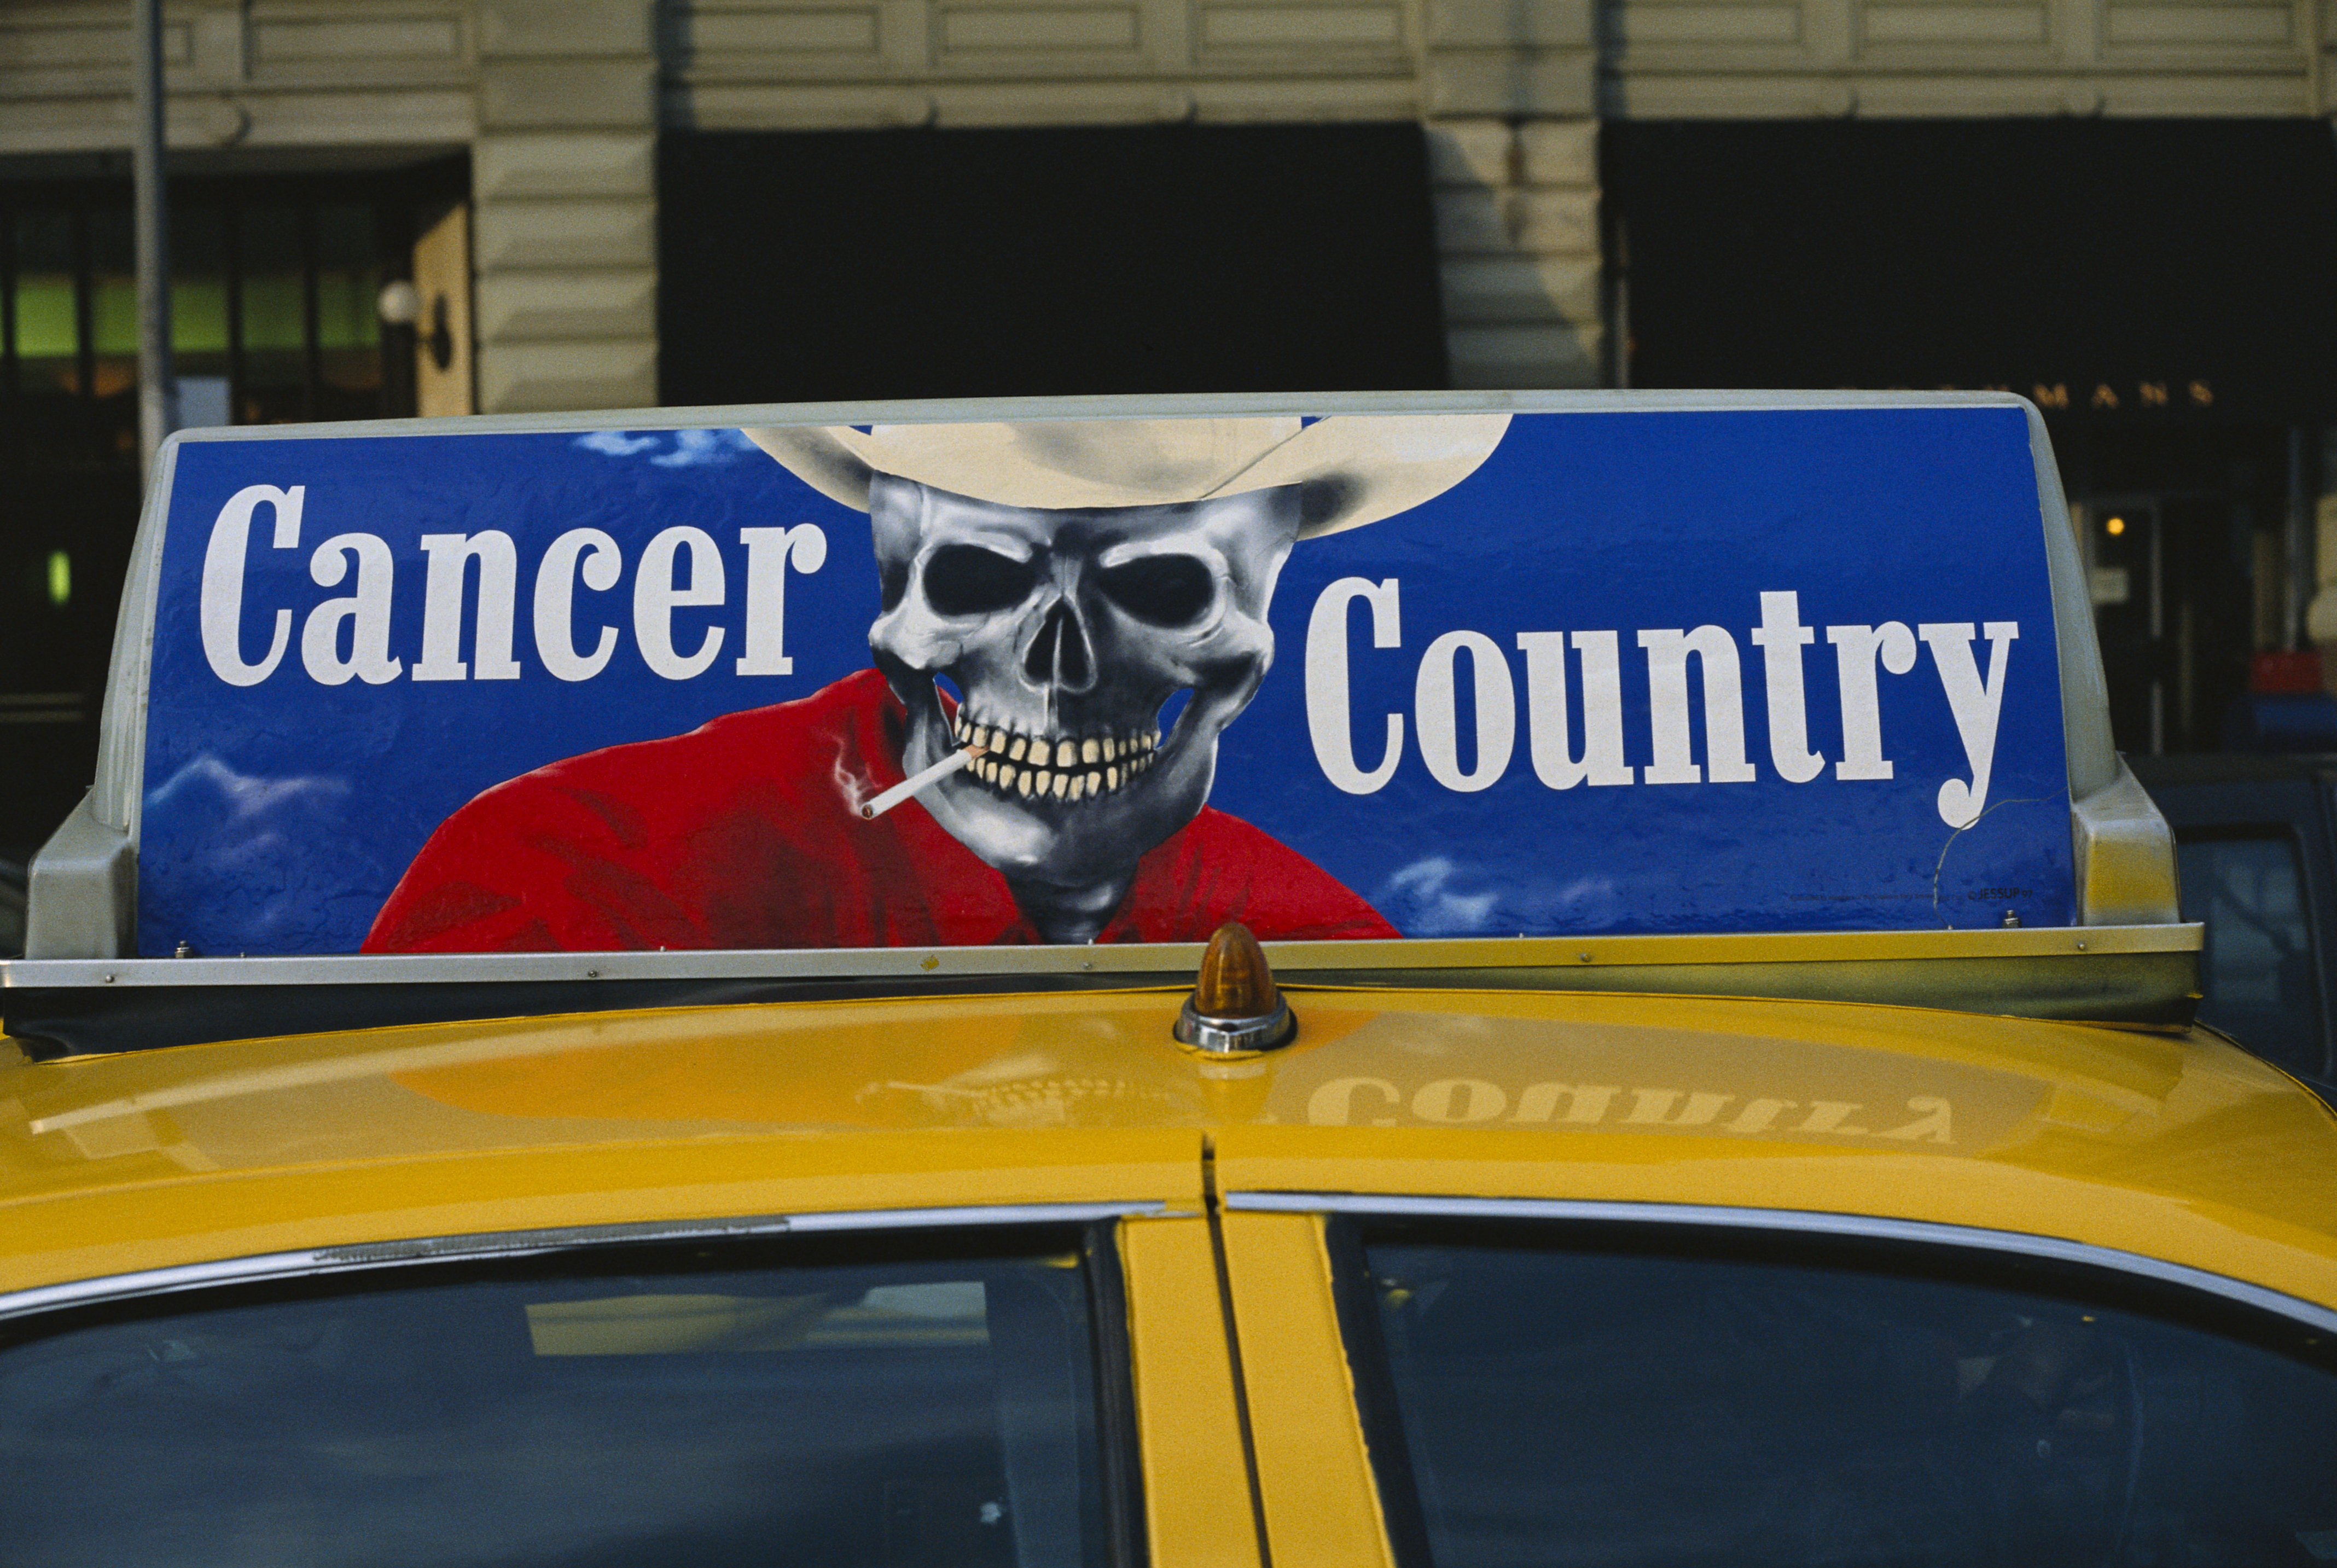 A taxicab with an anti-smoking advertisement.